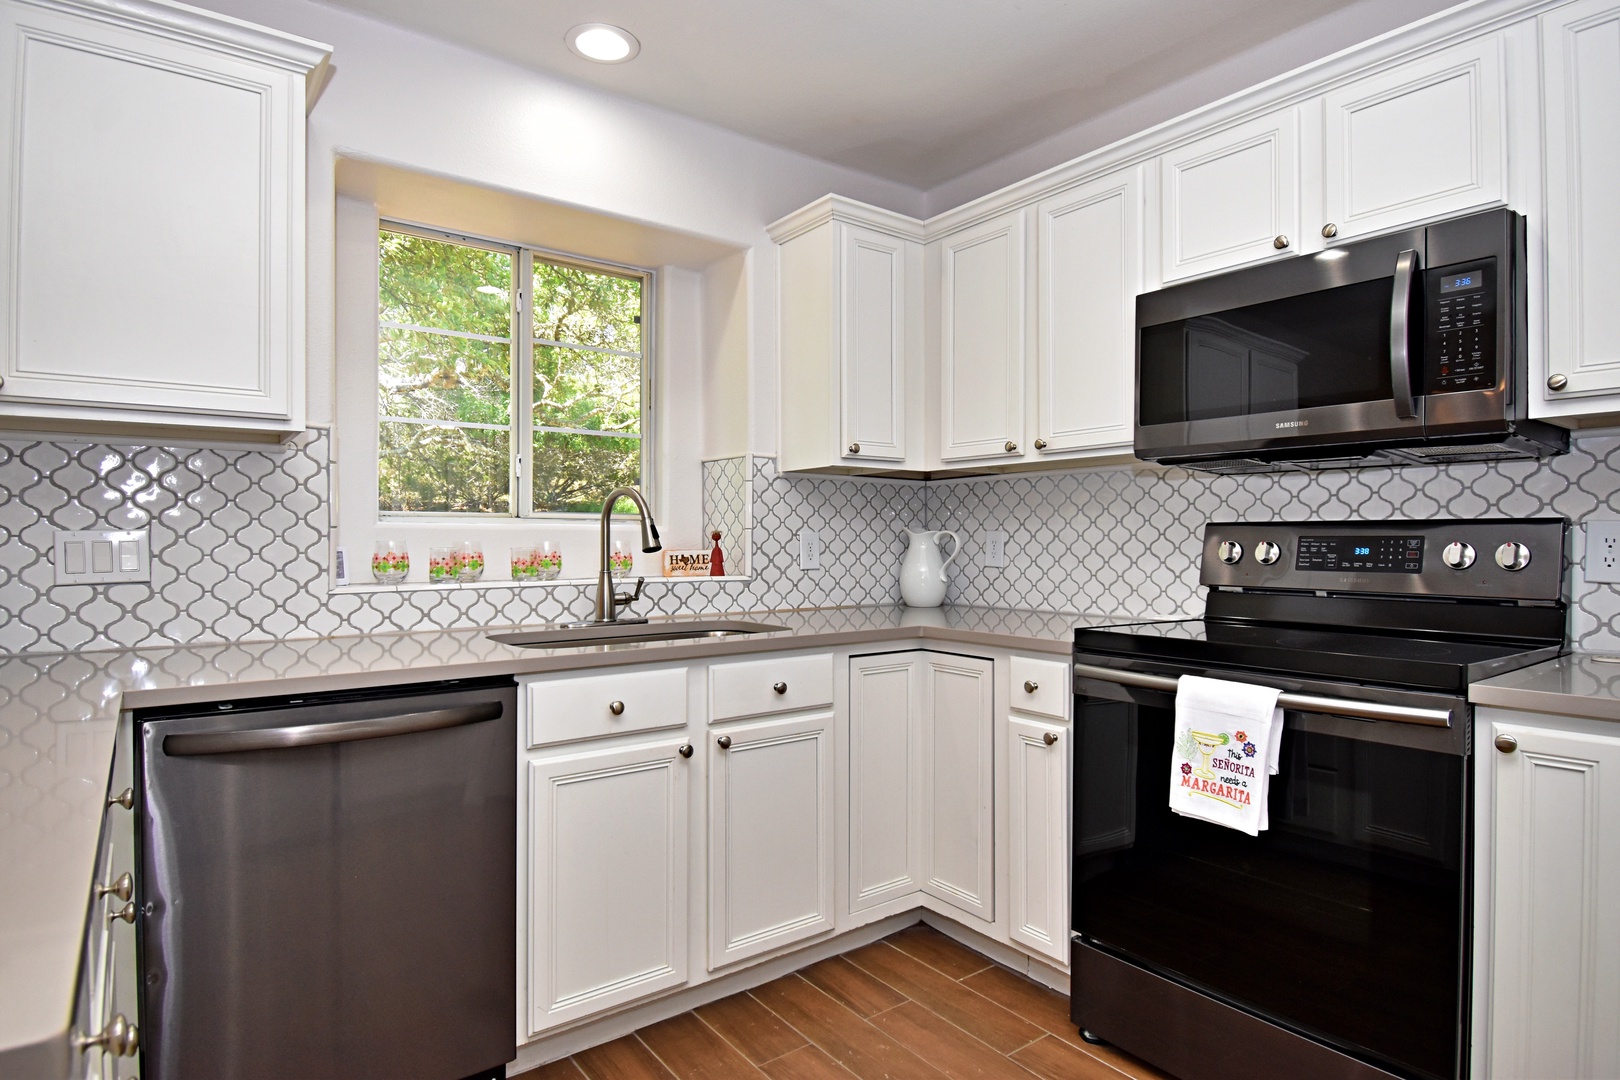 The chic kitchen offers ample space & all the comforts of home